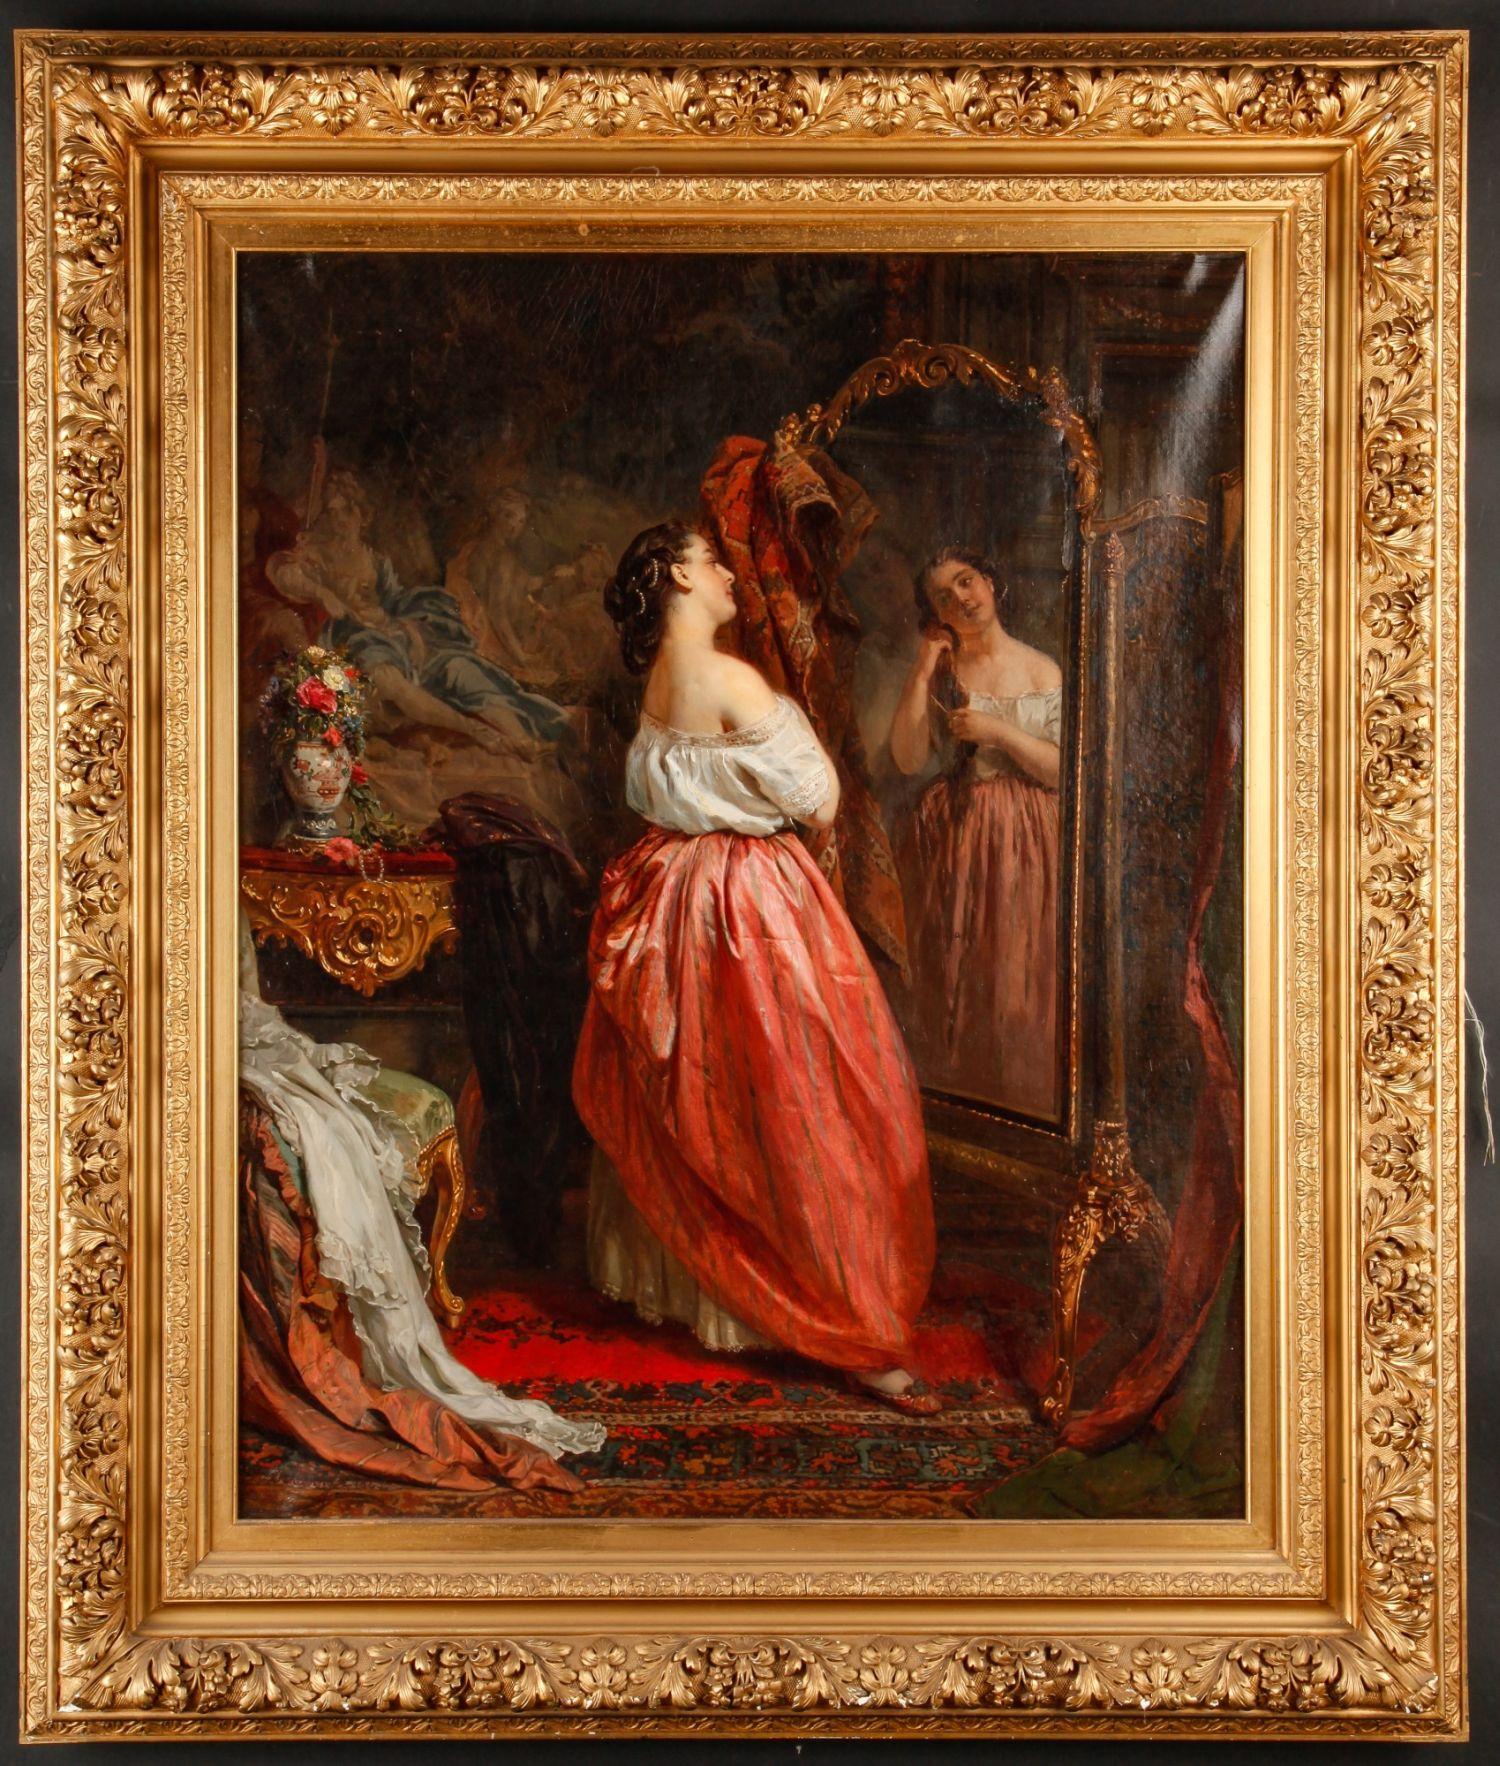 Oil on canvas painting by the German-born French genre and portrait painter Henri-Guillaume Schlesinger (1814-1893), titled At the Mirror, signed and dated 1863 (est. $10,000-$20,000).